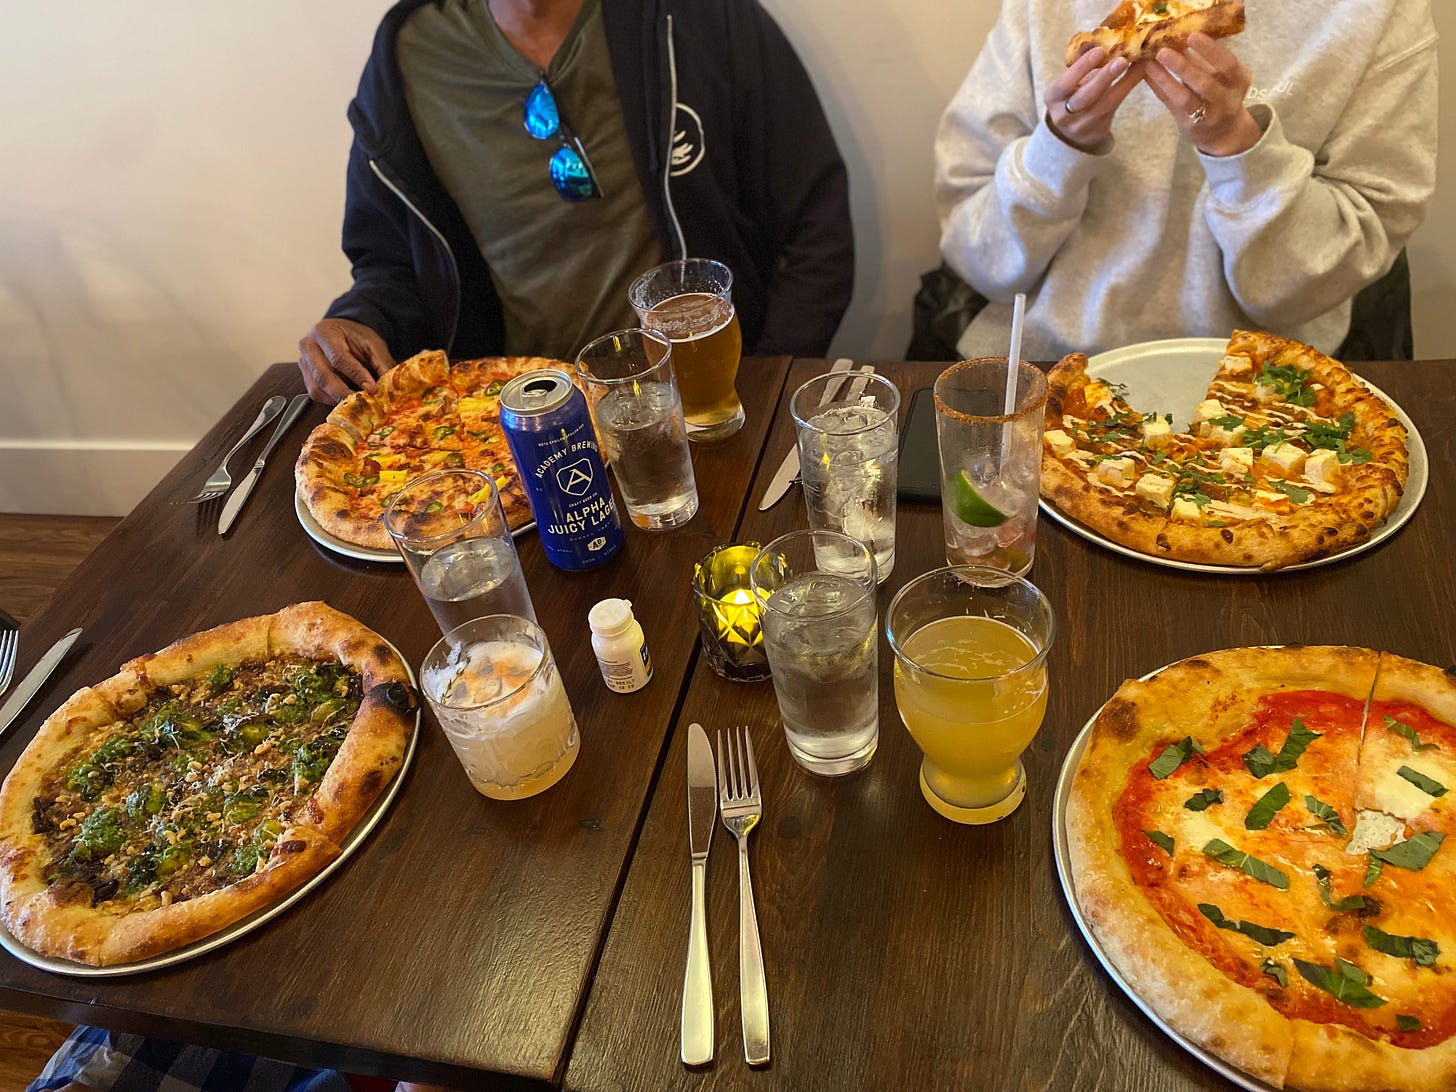 A table with four pizzas and a few drinks, as described below. Hiran and Tara (faces not visible) sit on the far side of the table.